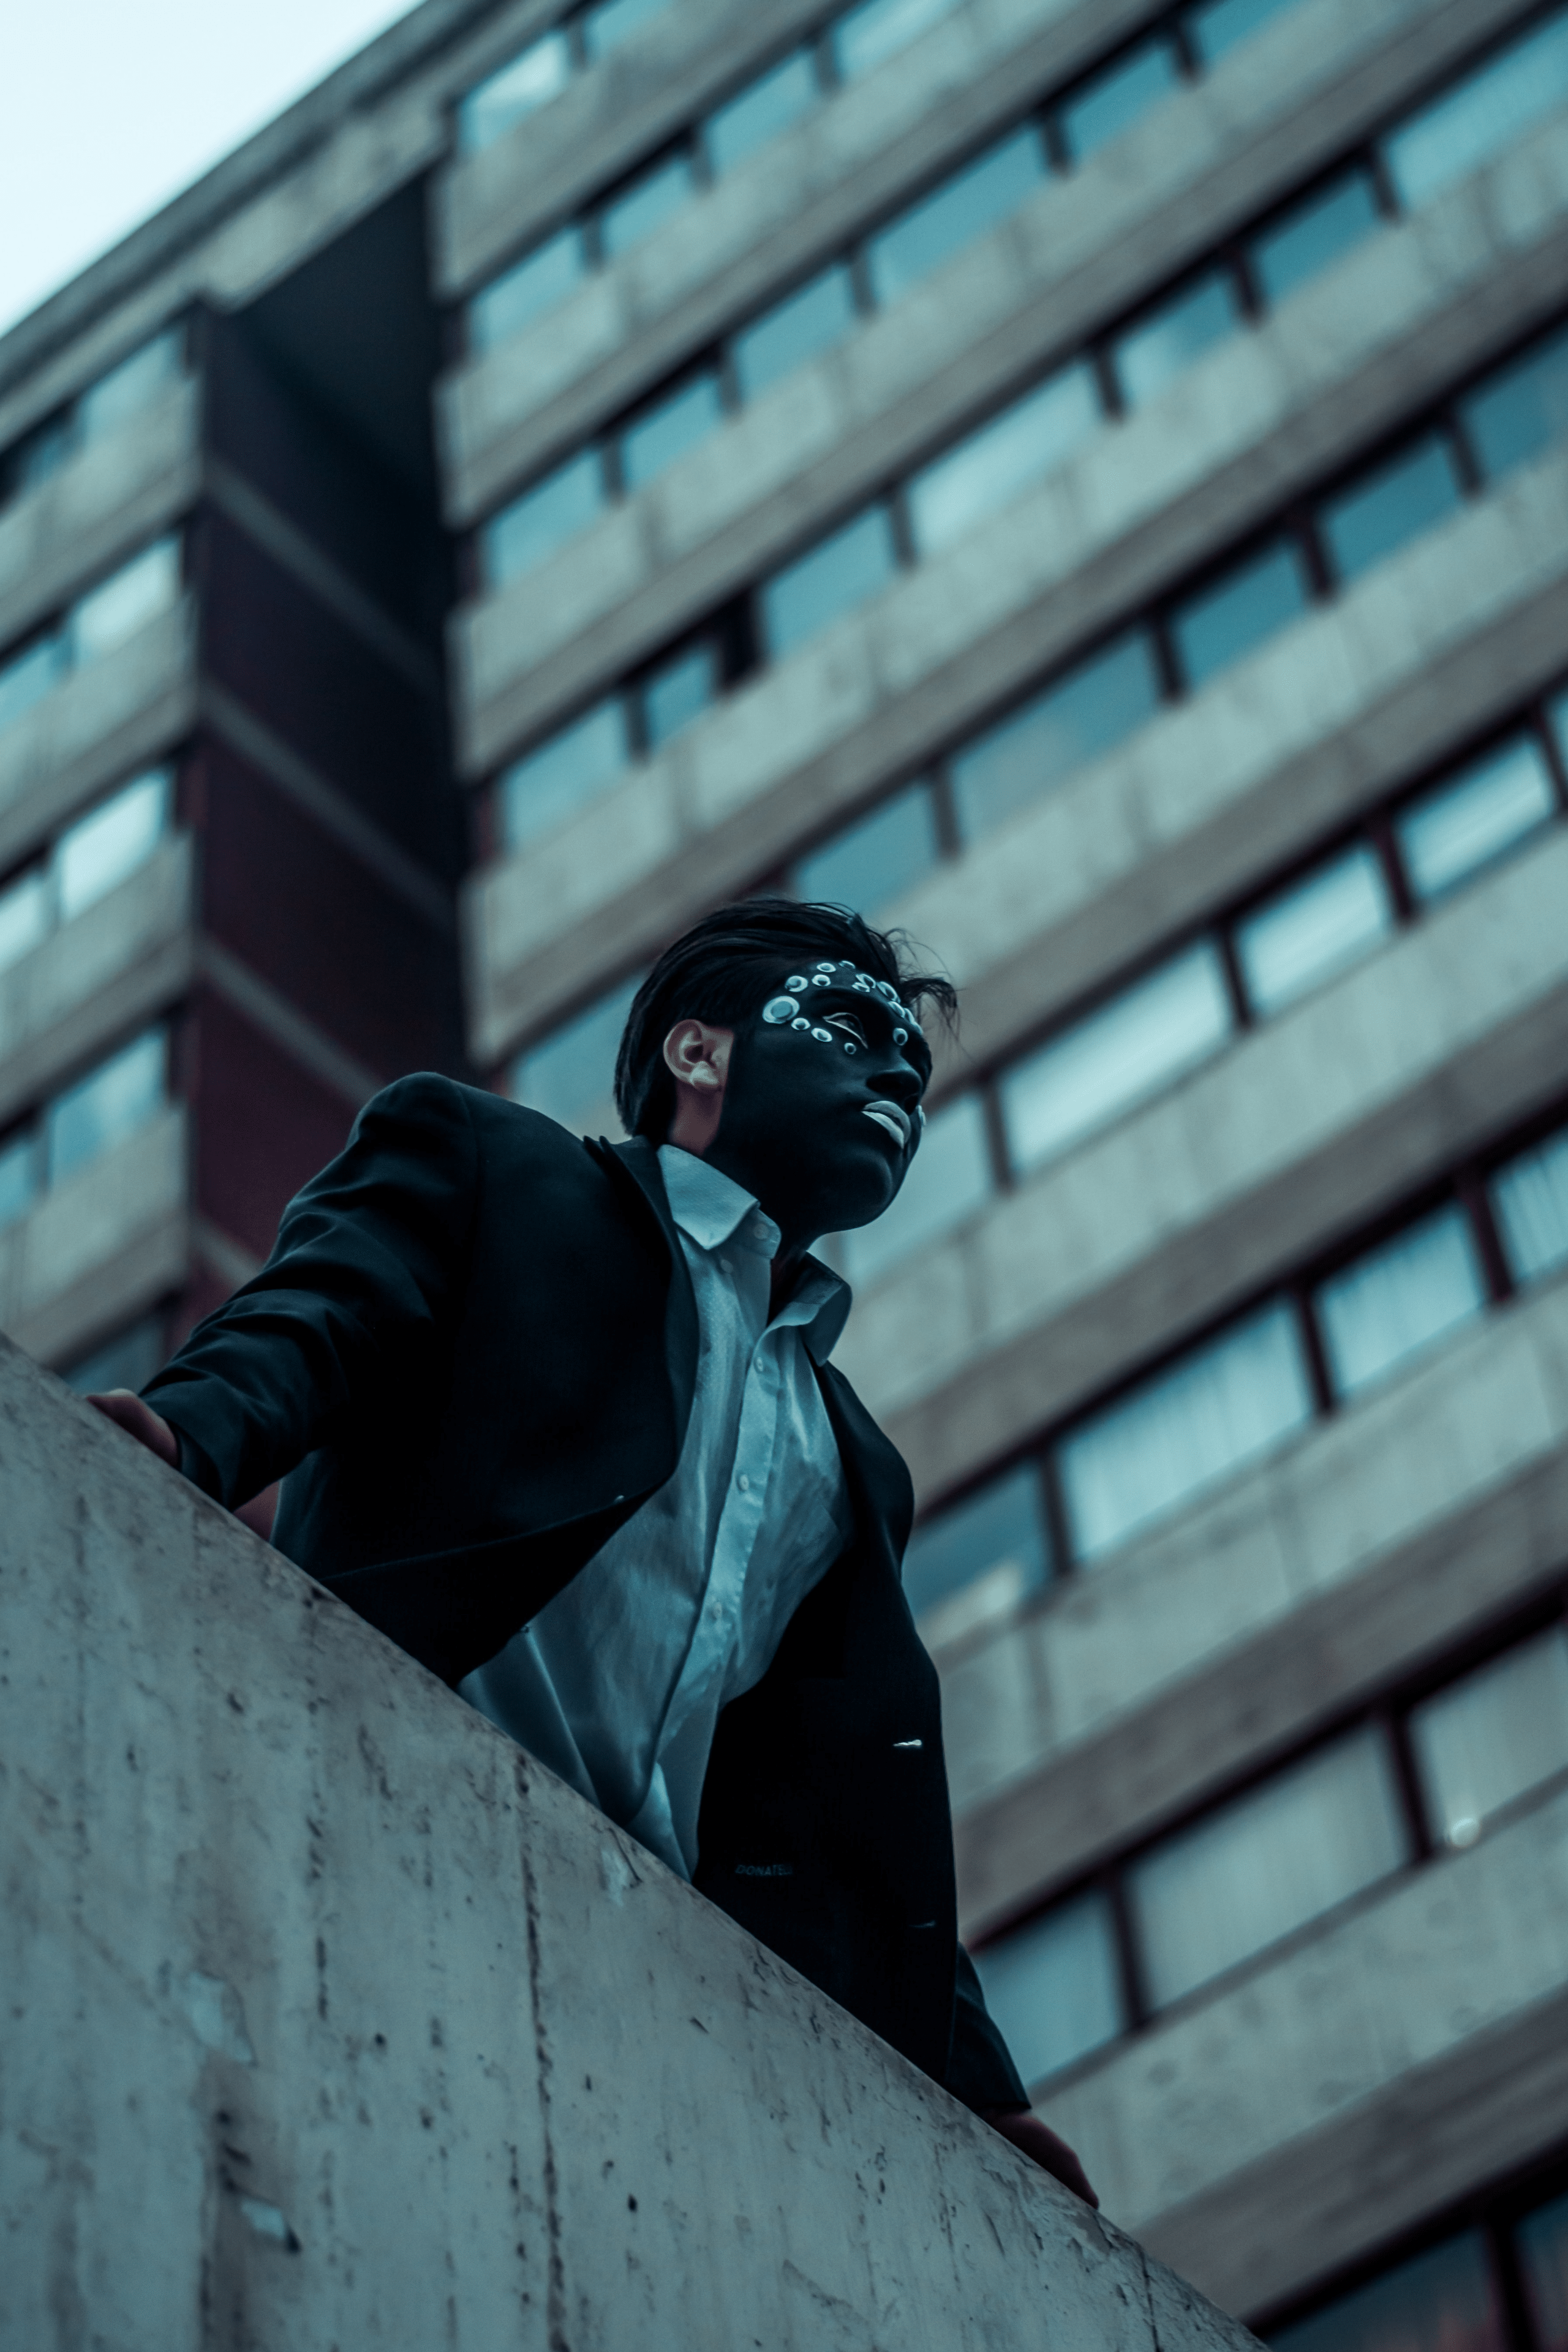 Elegantly dressed man wearing a black masquerade mask standing outside buildings under a cloudy sky evoking themes of mystery and identity